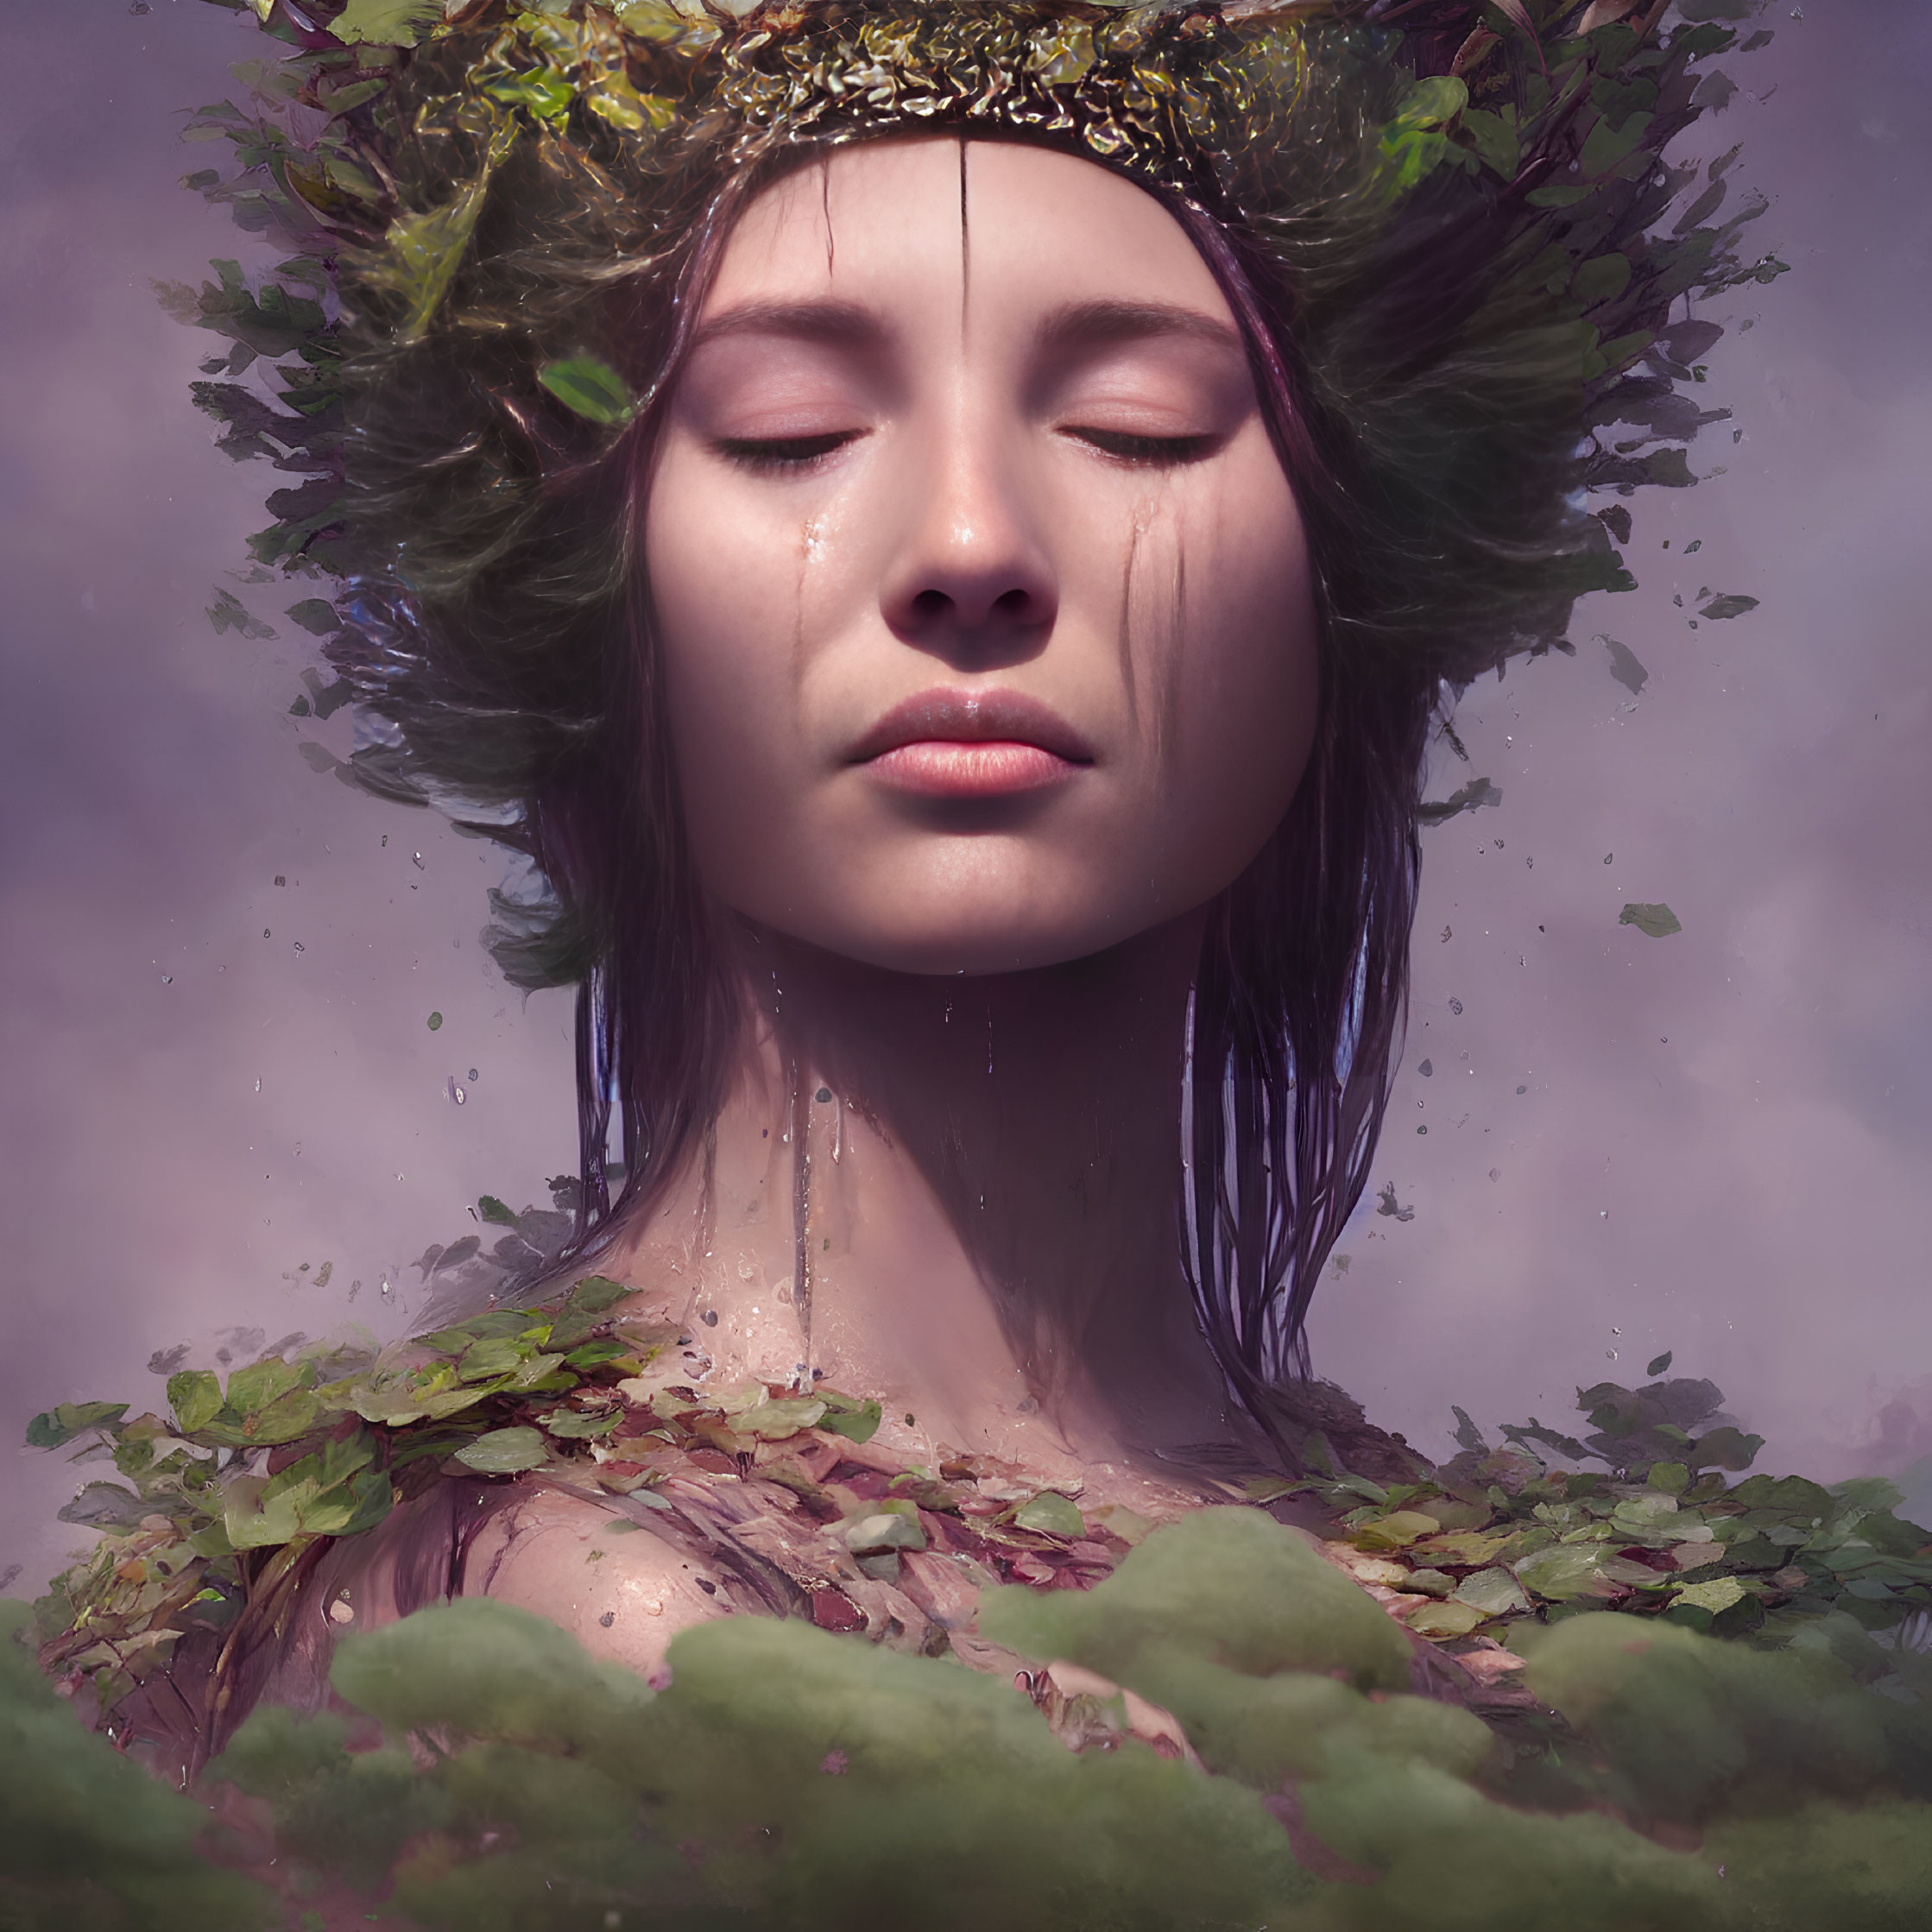 Mystical woman with leafy crown and nature aura